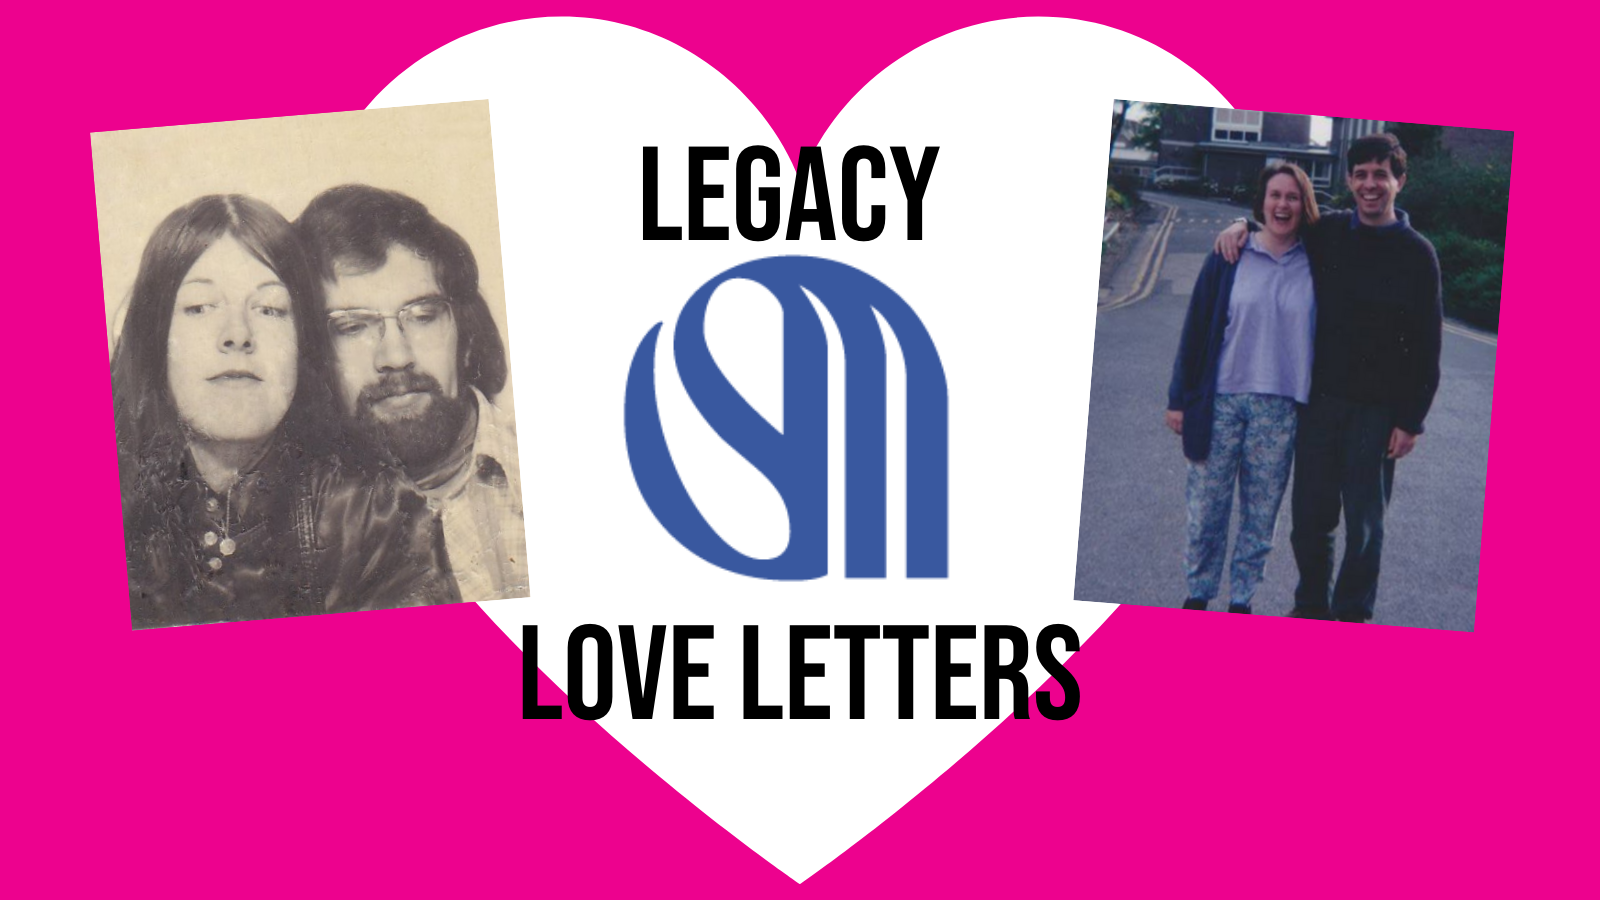 Legacy love letters name